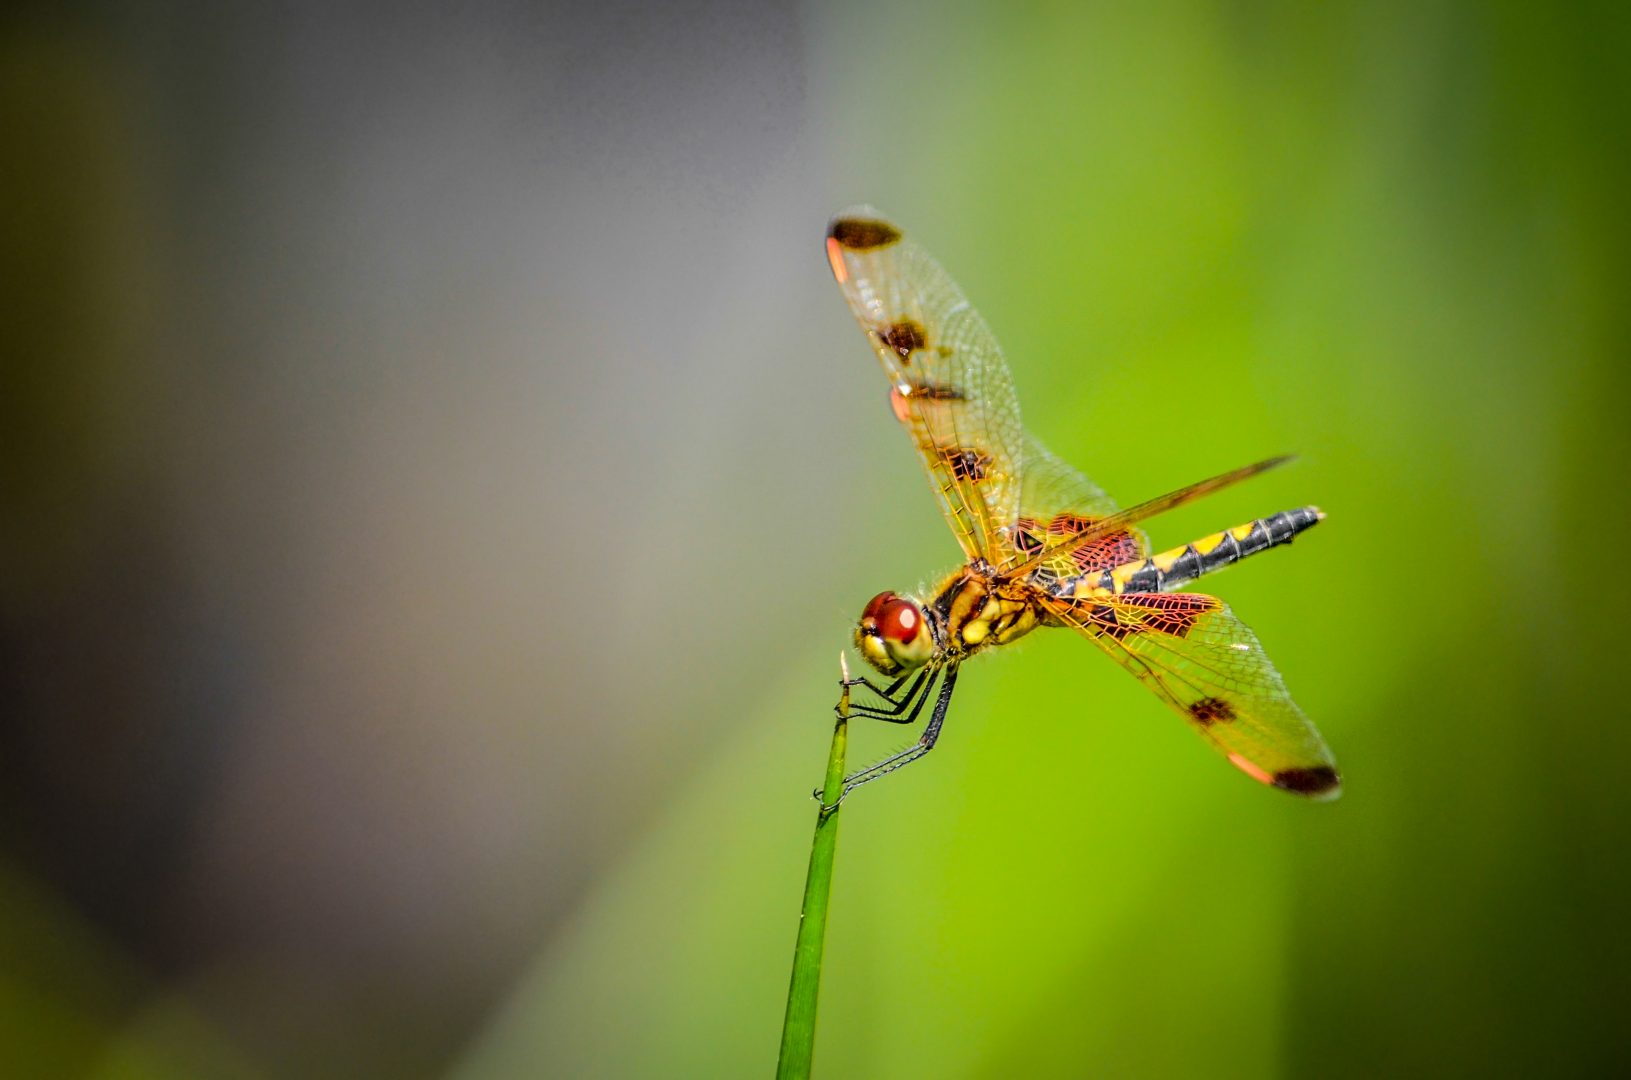 Callico pennant dragonfly holding on to the end of a blade of grass.